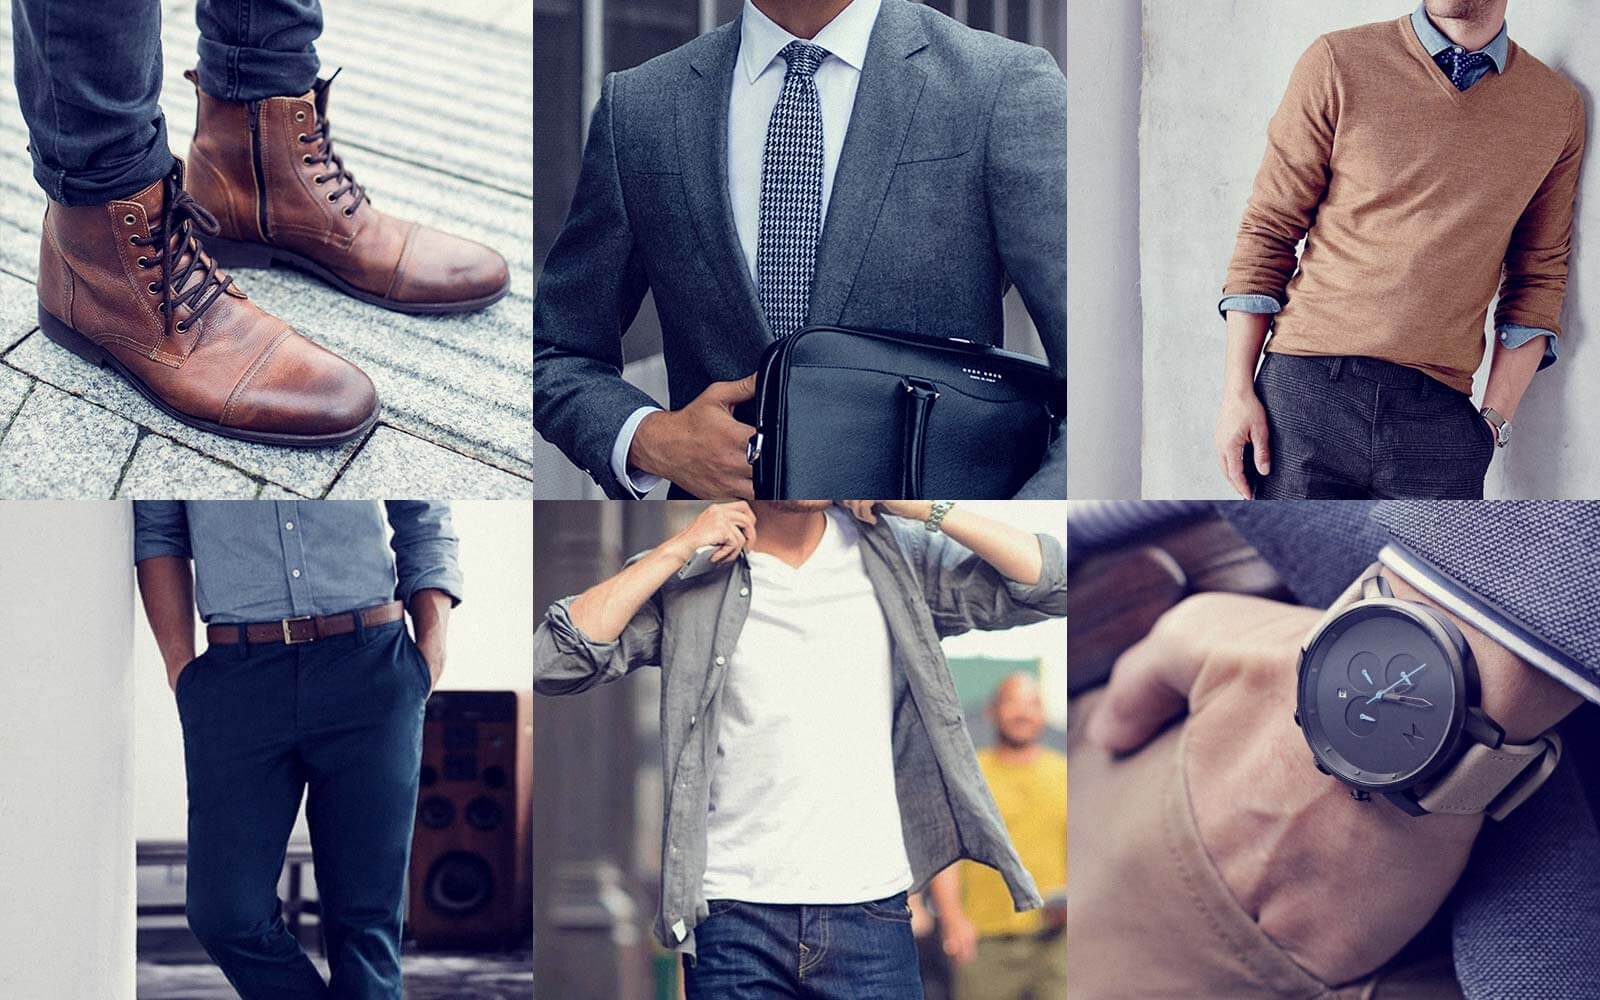 The 10 Things Women Find Most Attractive in Men's Style - The GentleManual